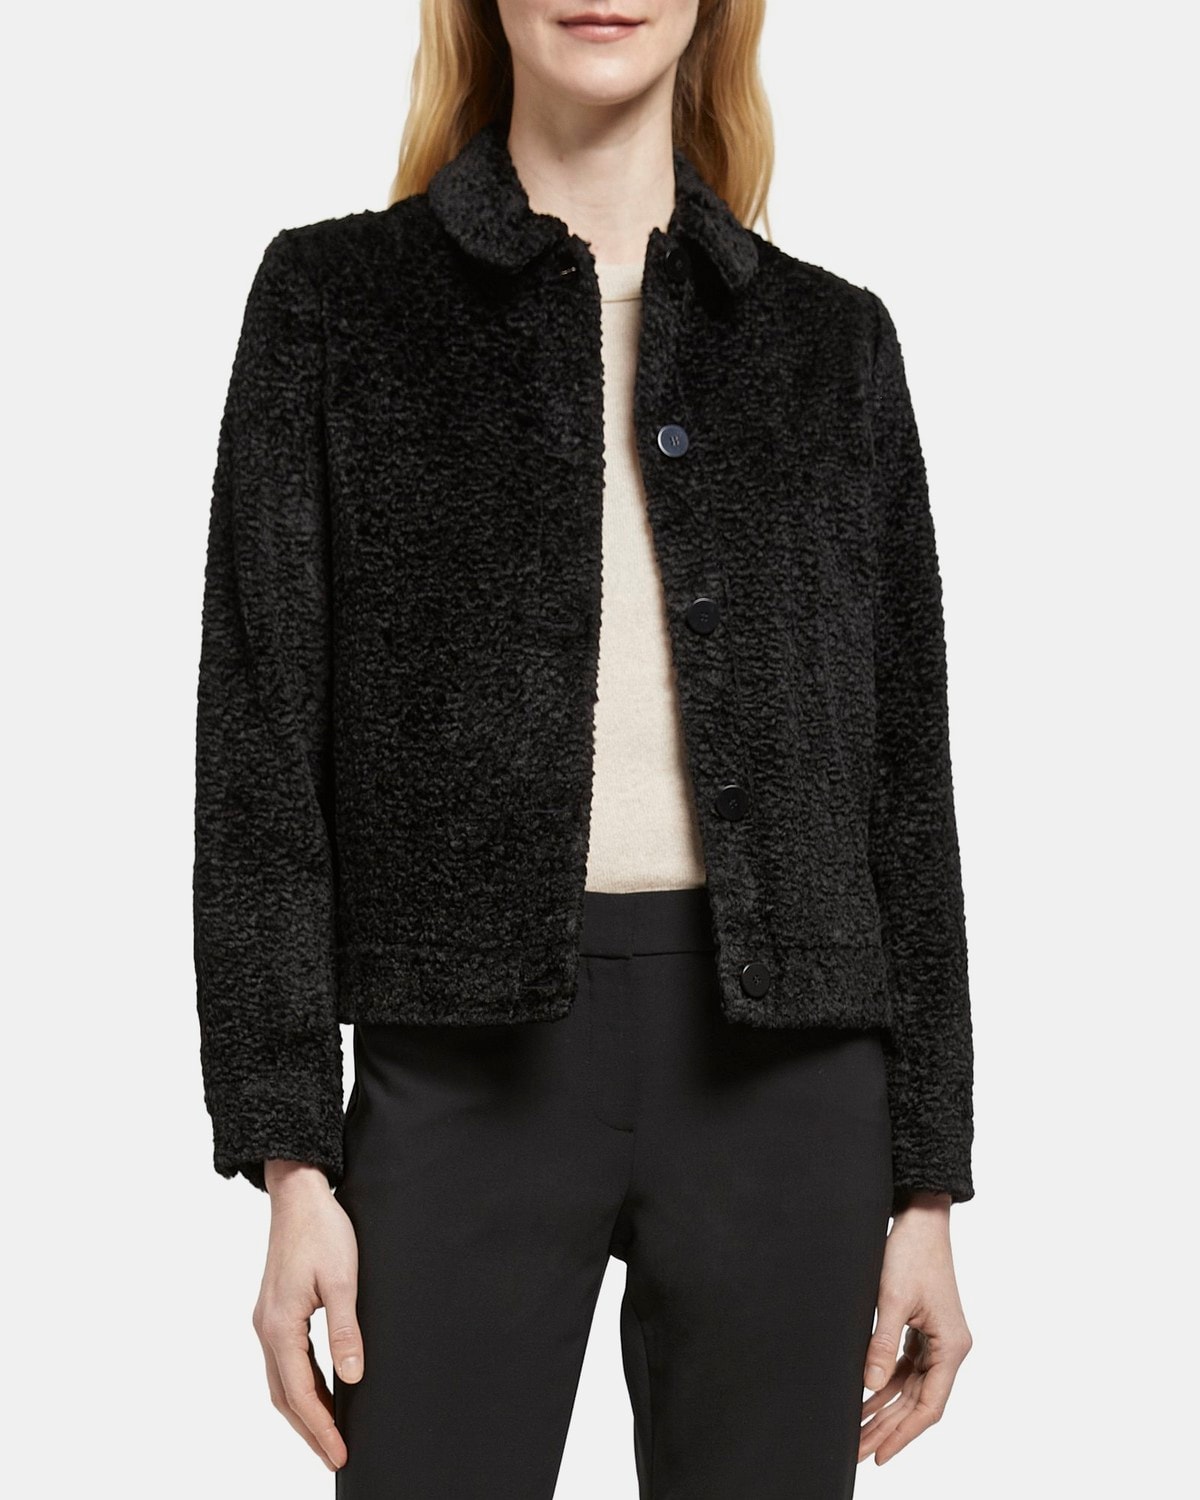 Cropped Jacket in Faux Shearling